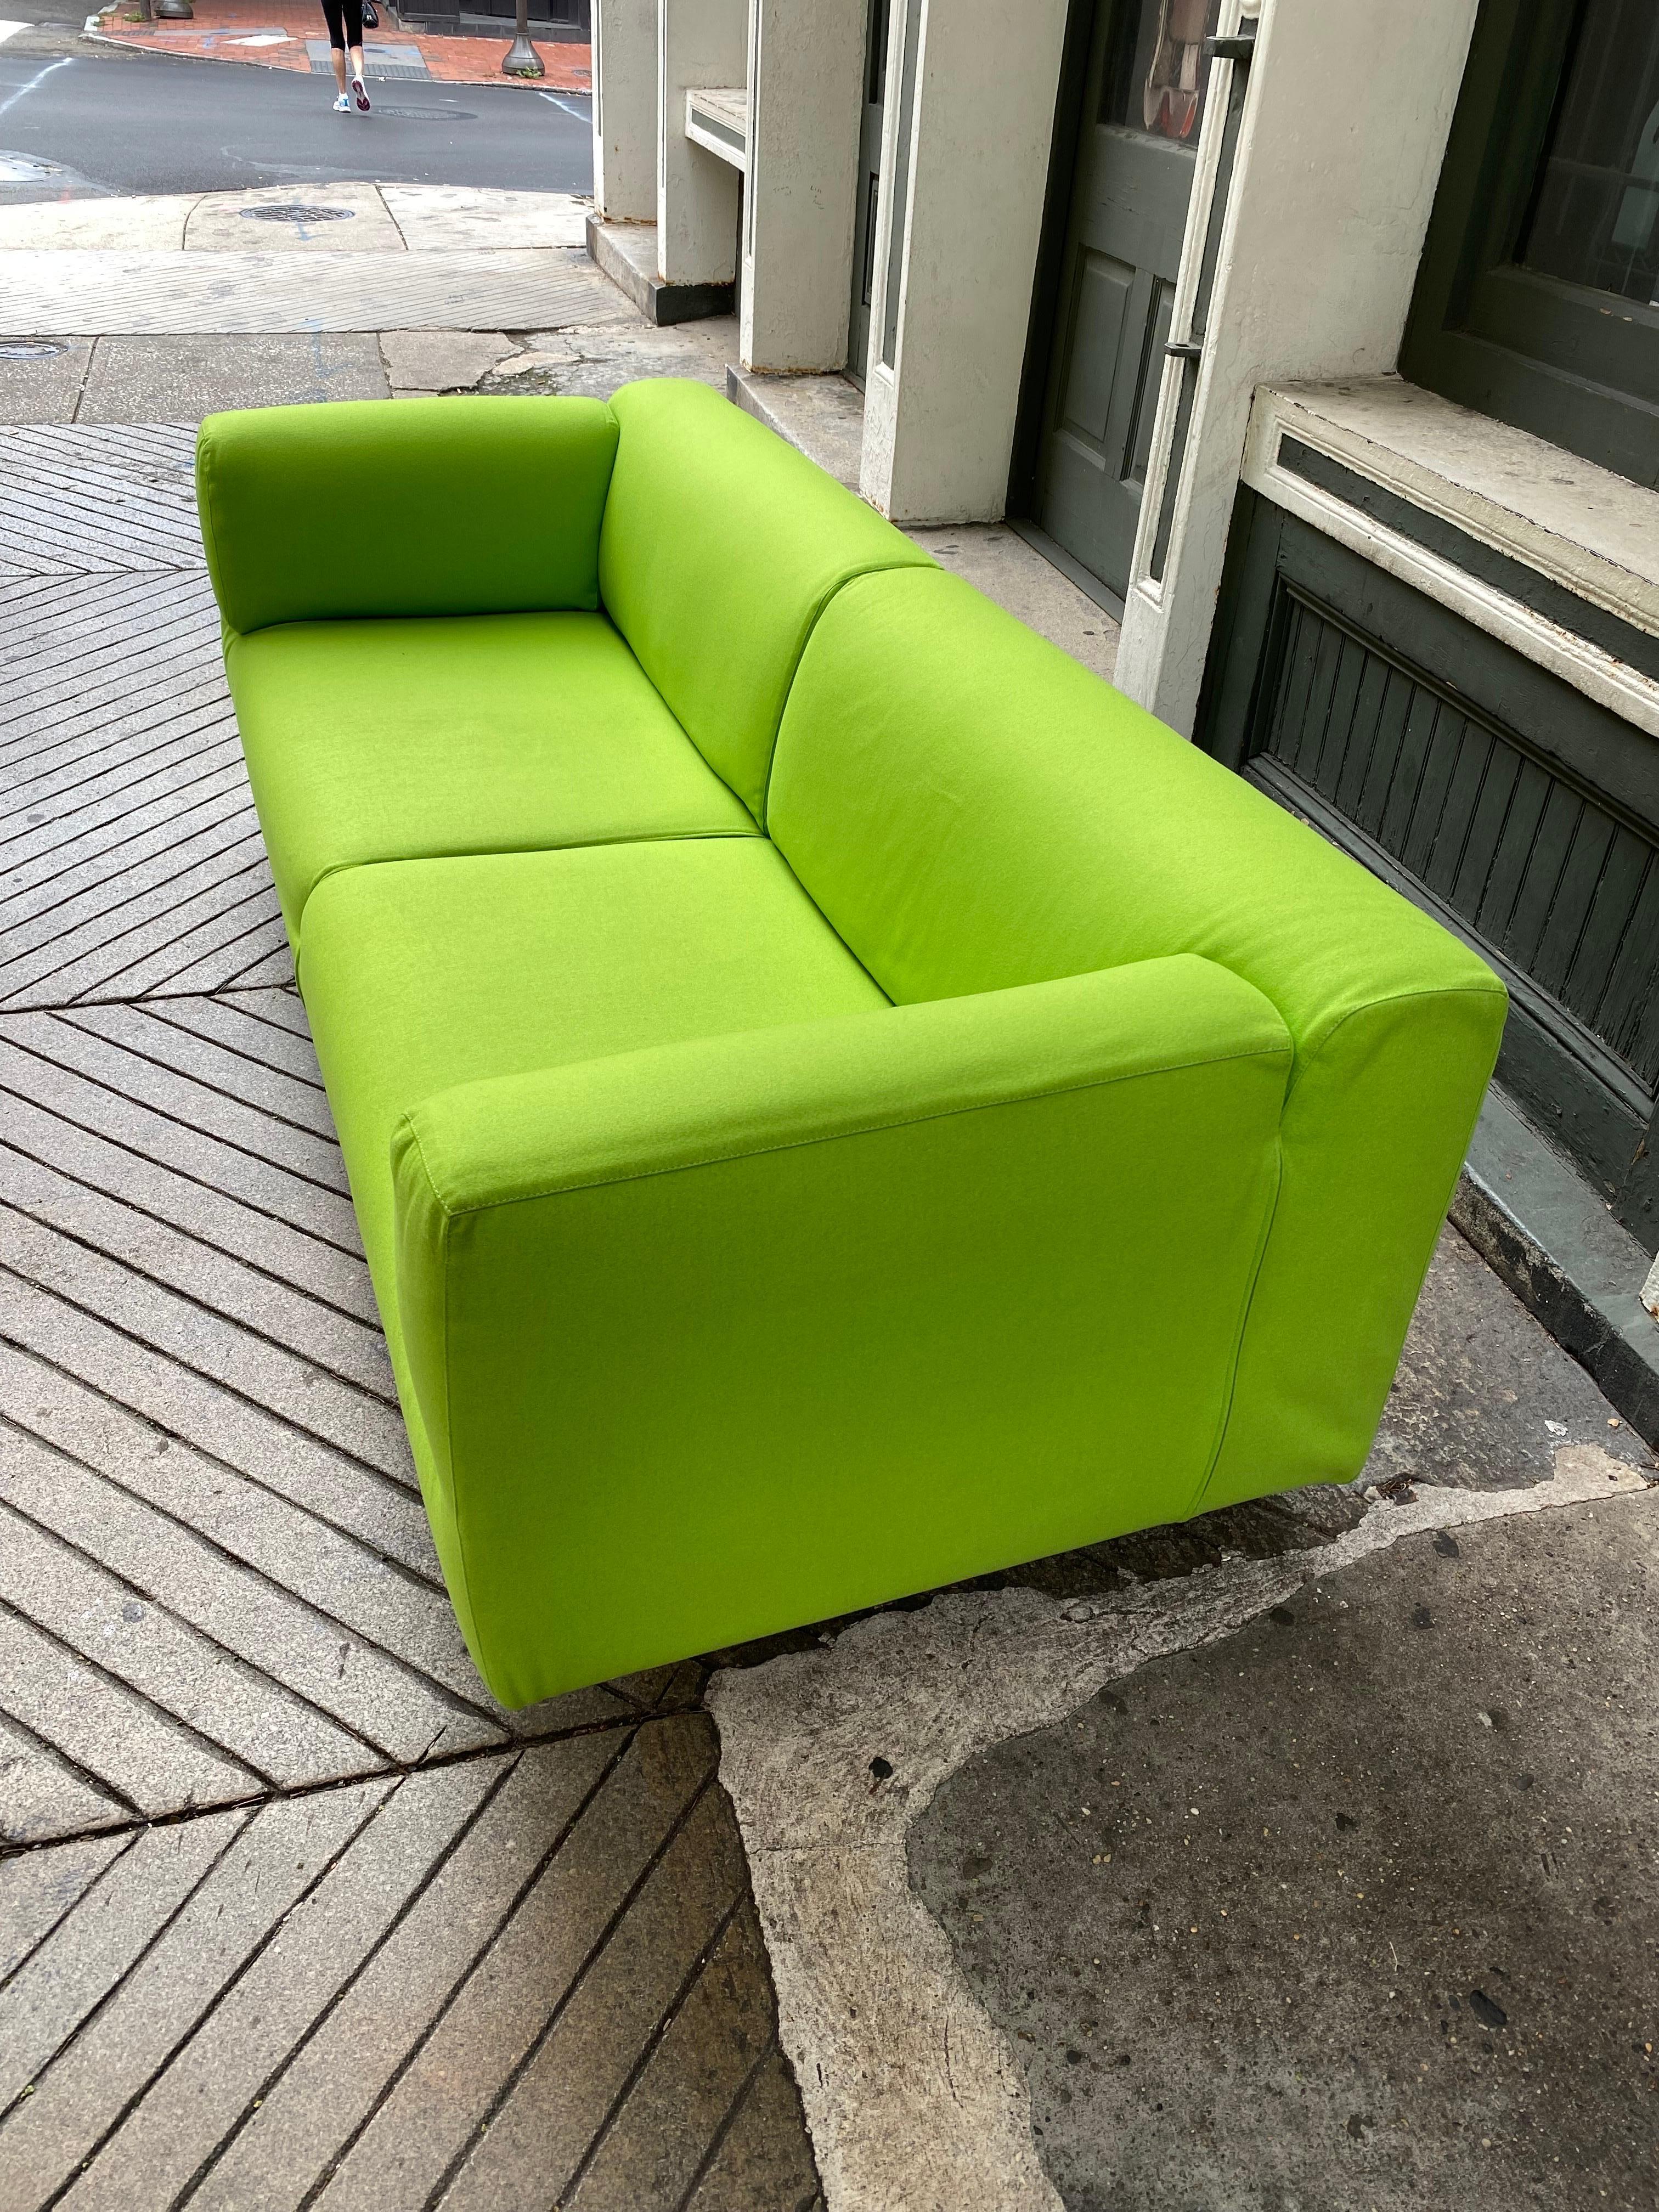 Piero Lissoni for Cassina met divano sofa in chartreuse fabric. In very nice Original Condition. Sofa is about 15 years old. Classic Simple Design sure to fit into many environments!